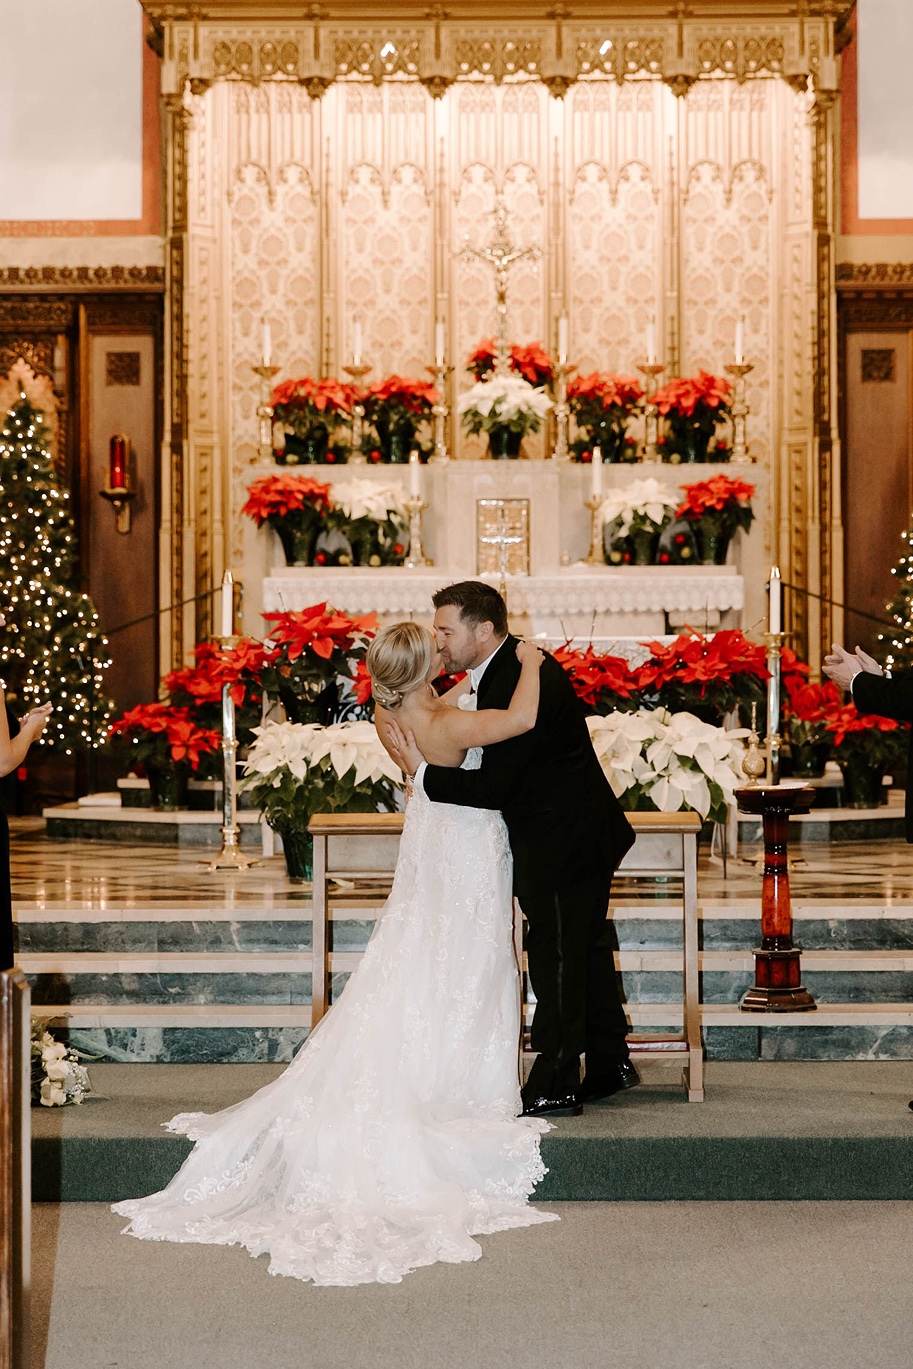 Bride and groom kiss at their winter wedding in Boston